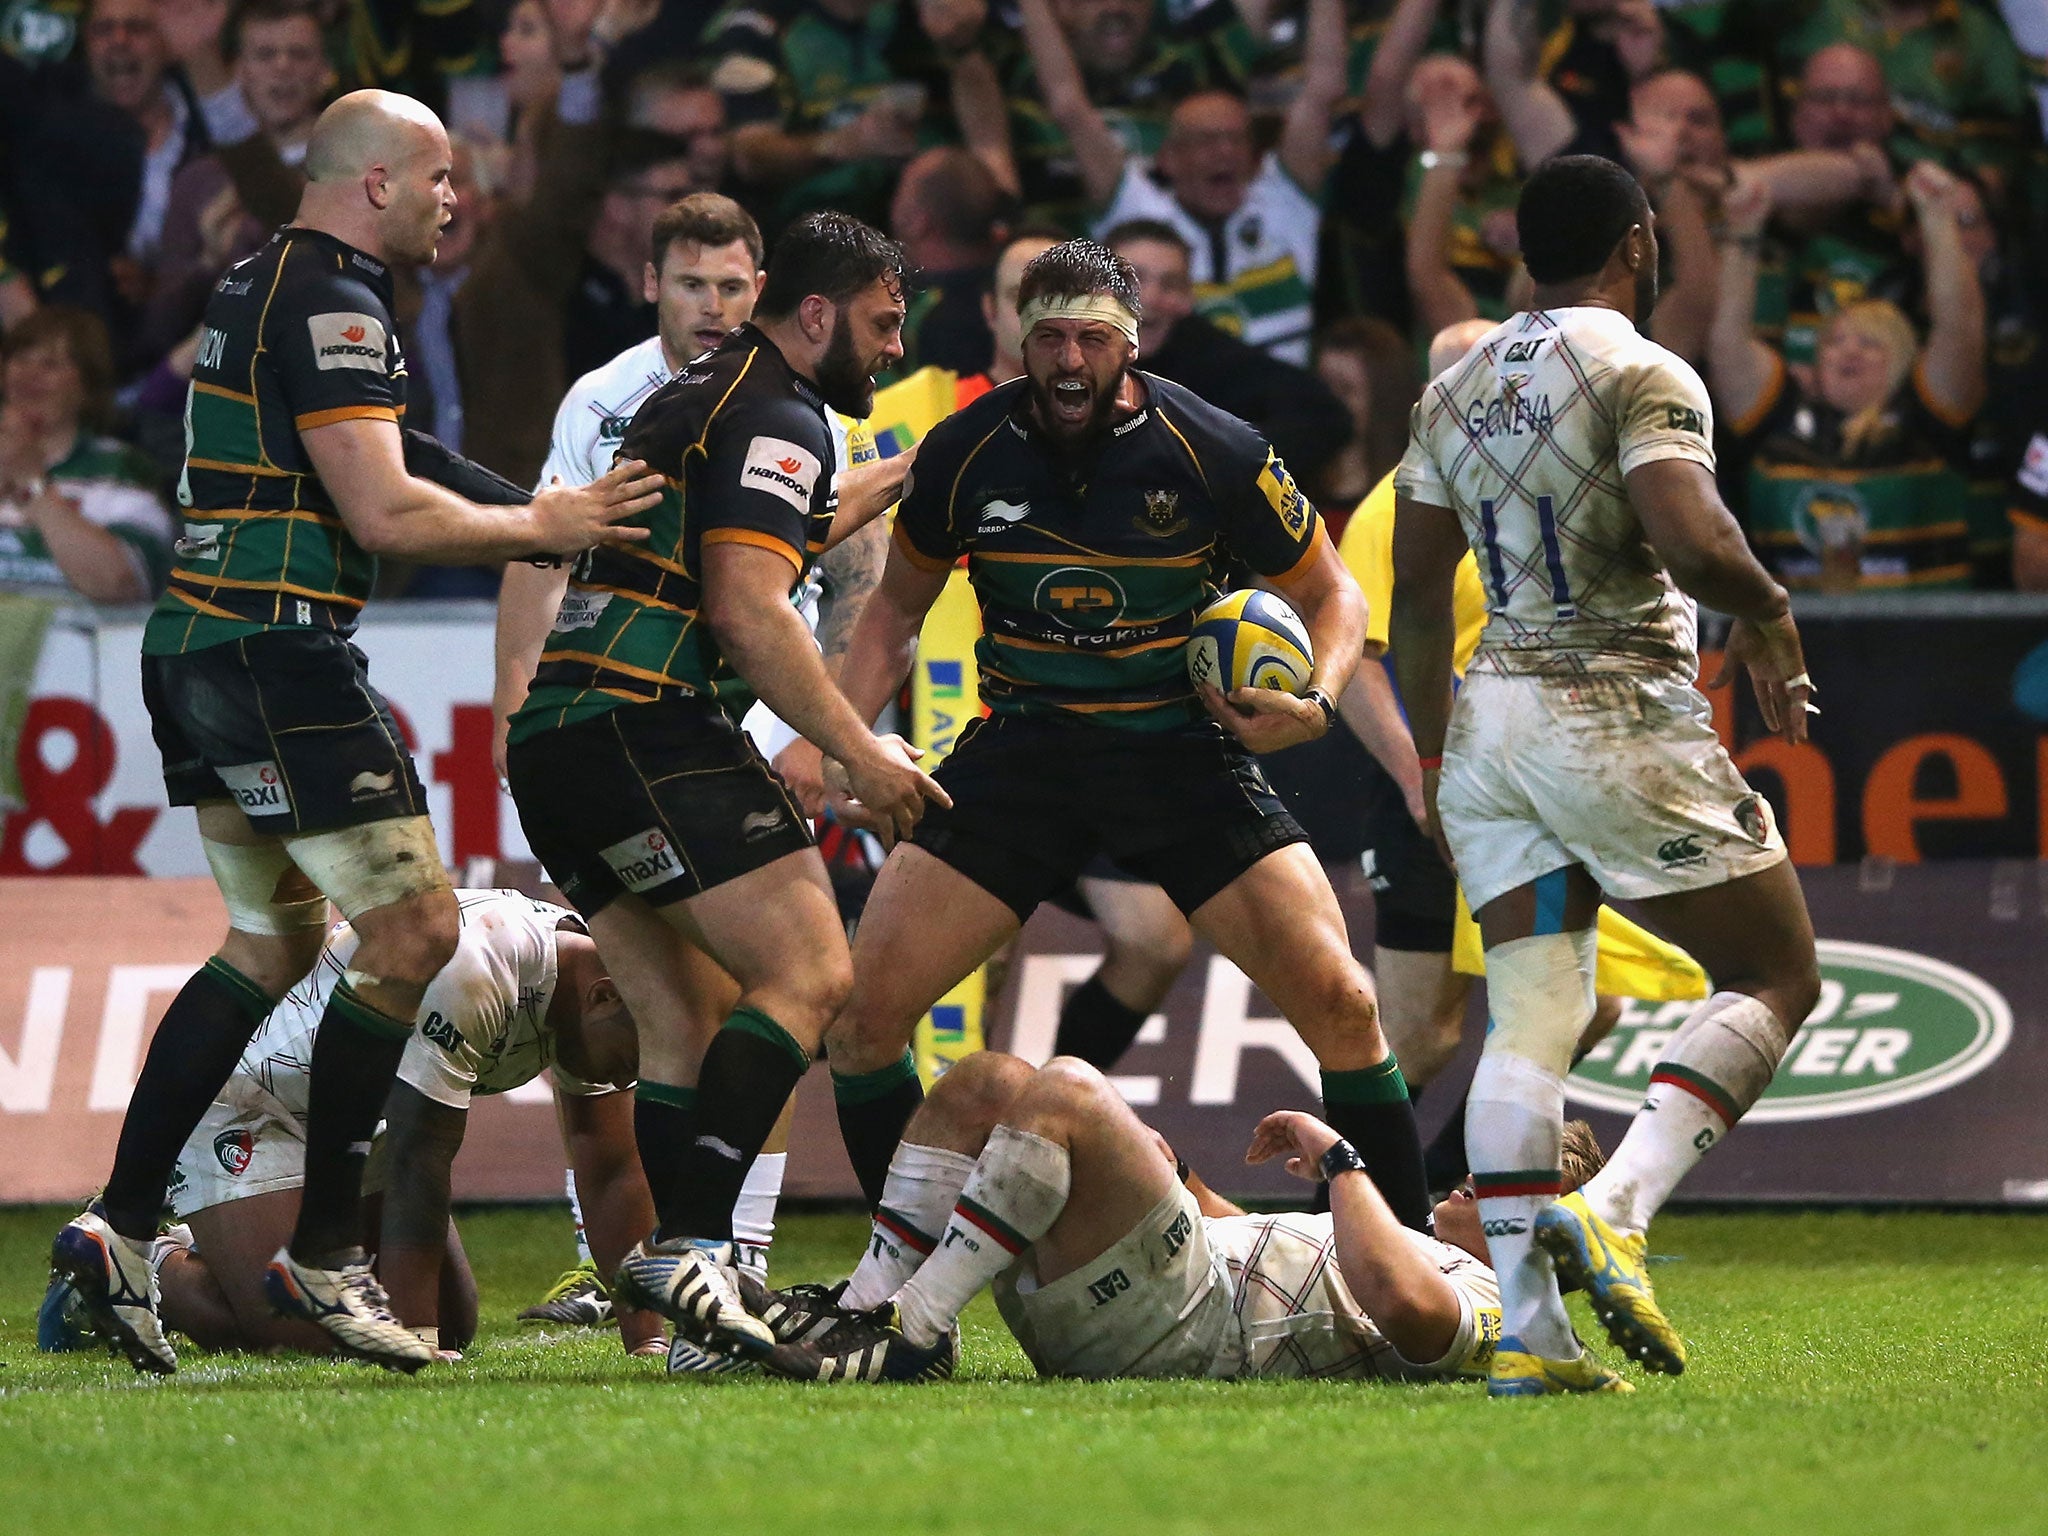 Tom Wood celebrates scoring the winning try over Leicester